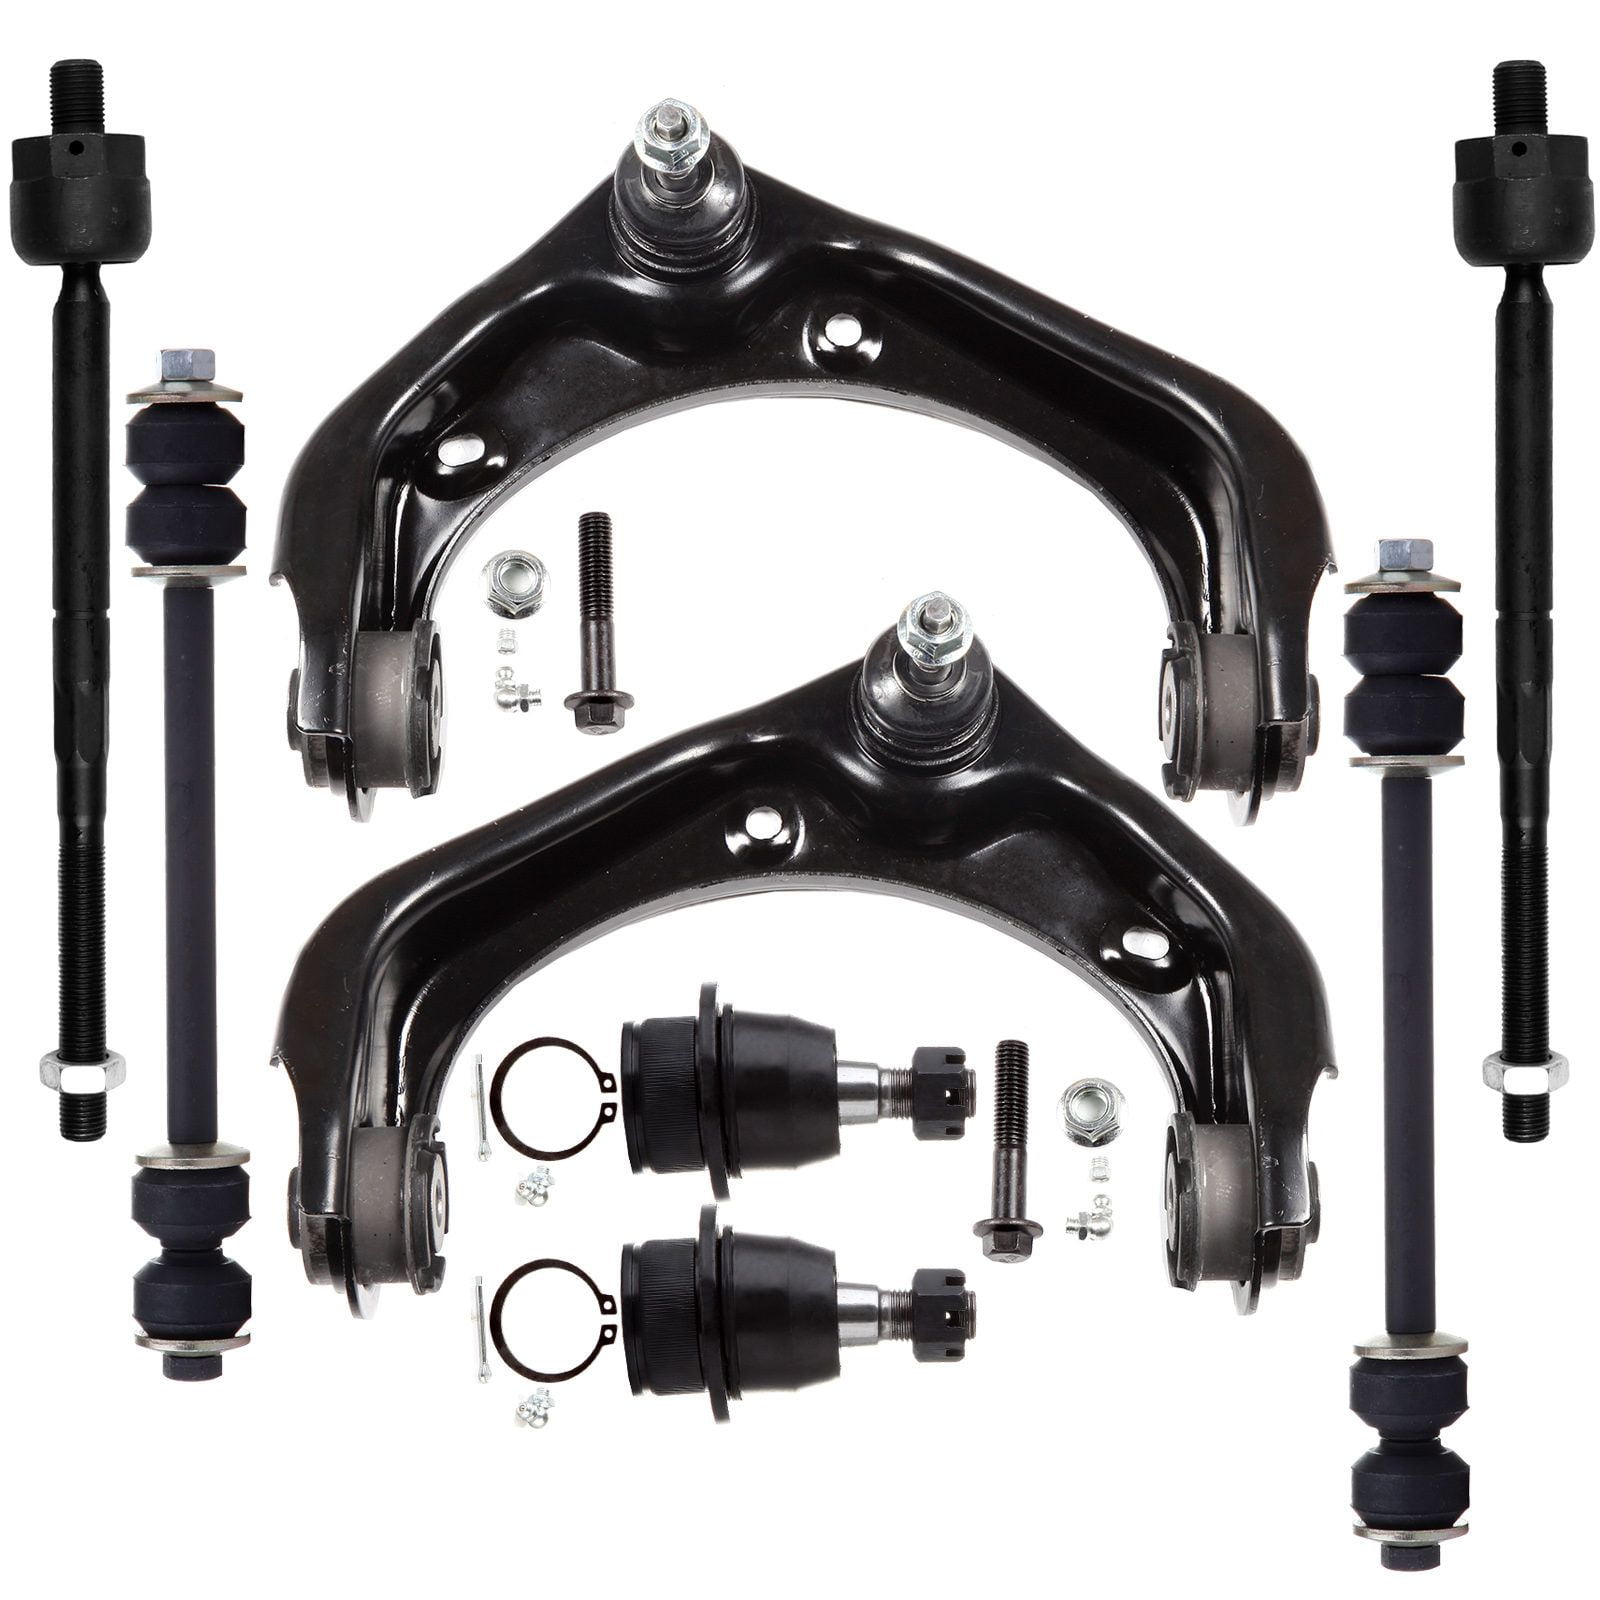 SCITOO SCITOO 8pcs Suspension Kit Front Control Arm Ball Joint Sway Bar Link Tie Rod Ends fit 2006-2010 Ford Explorer 